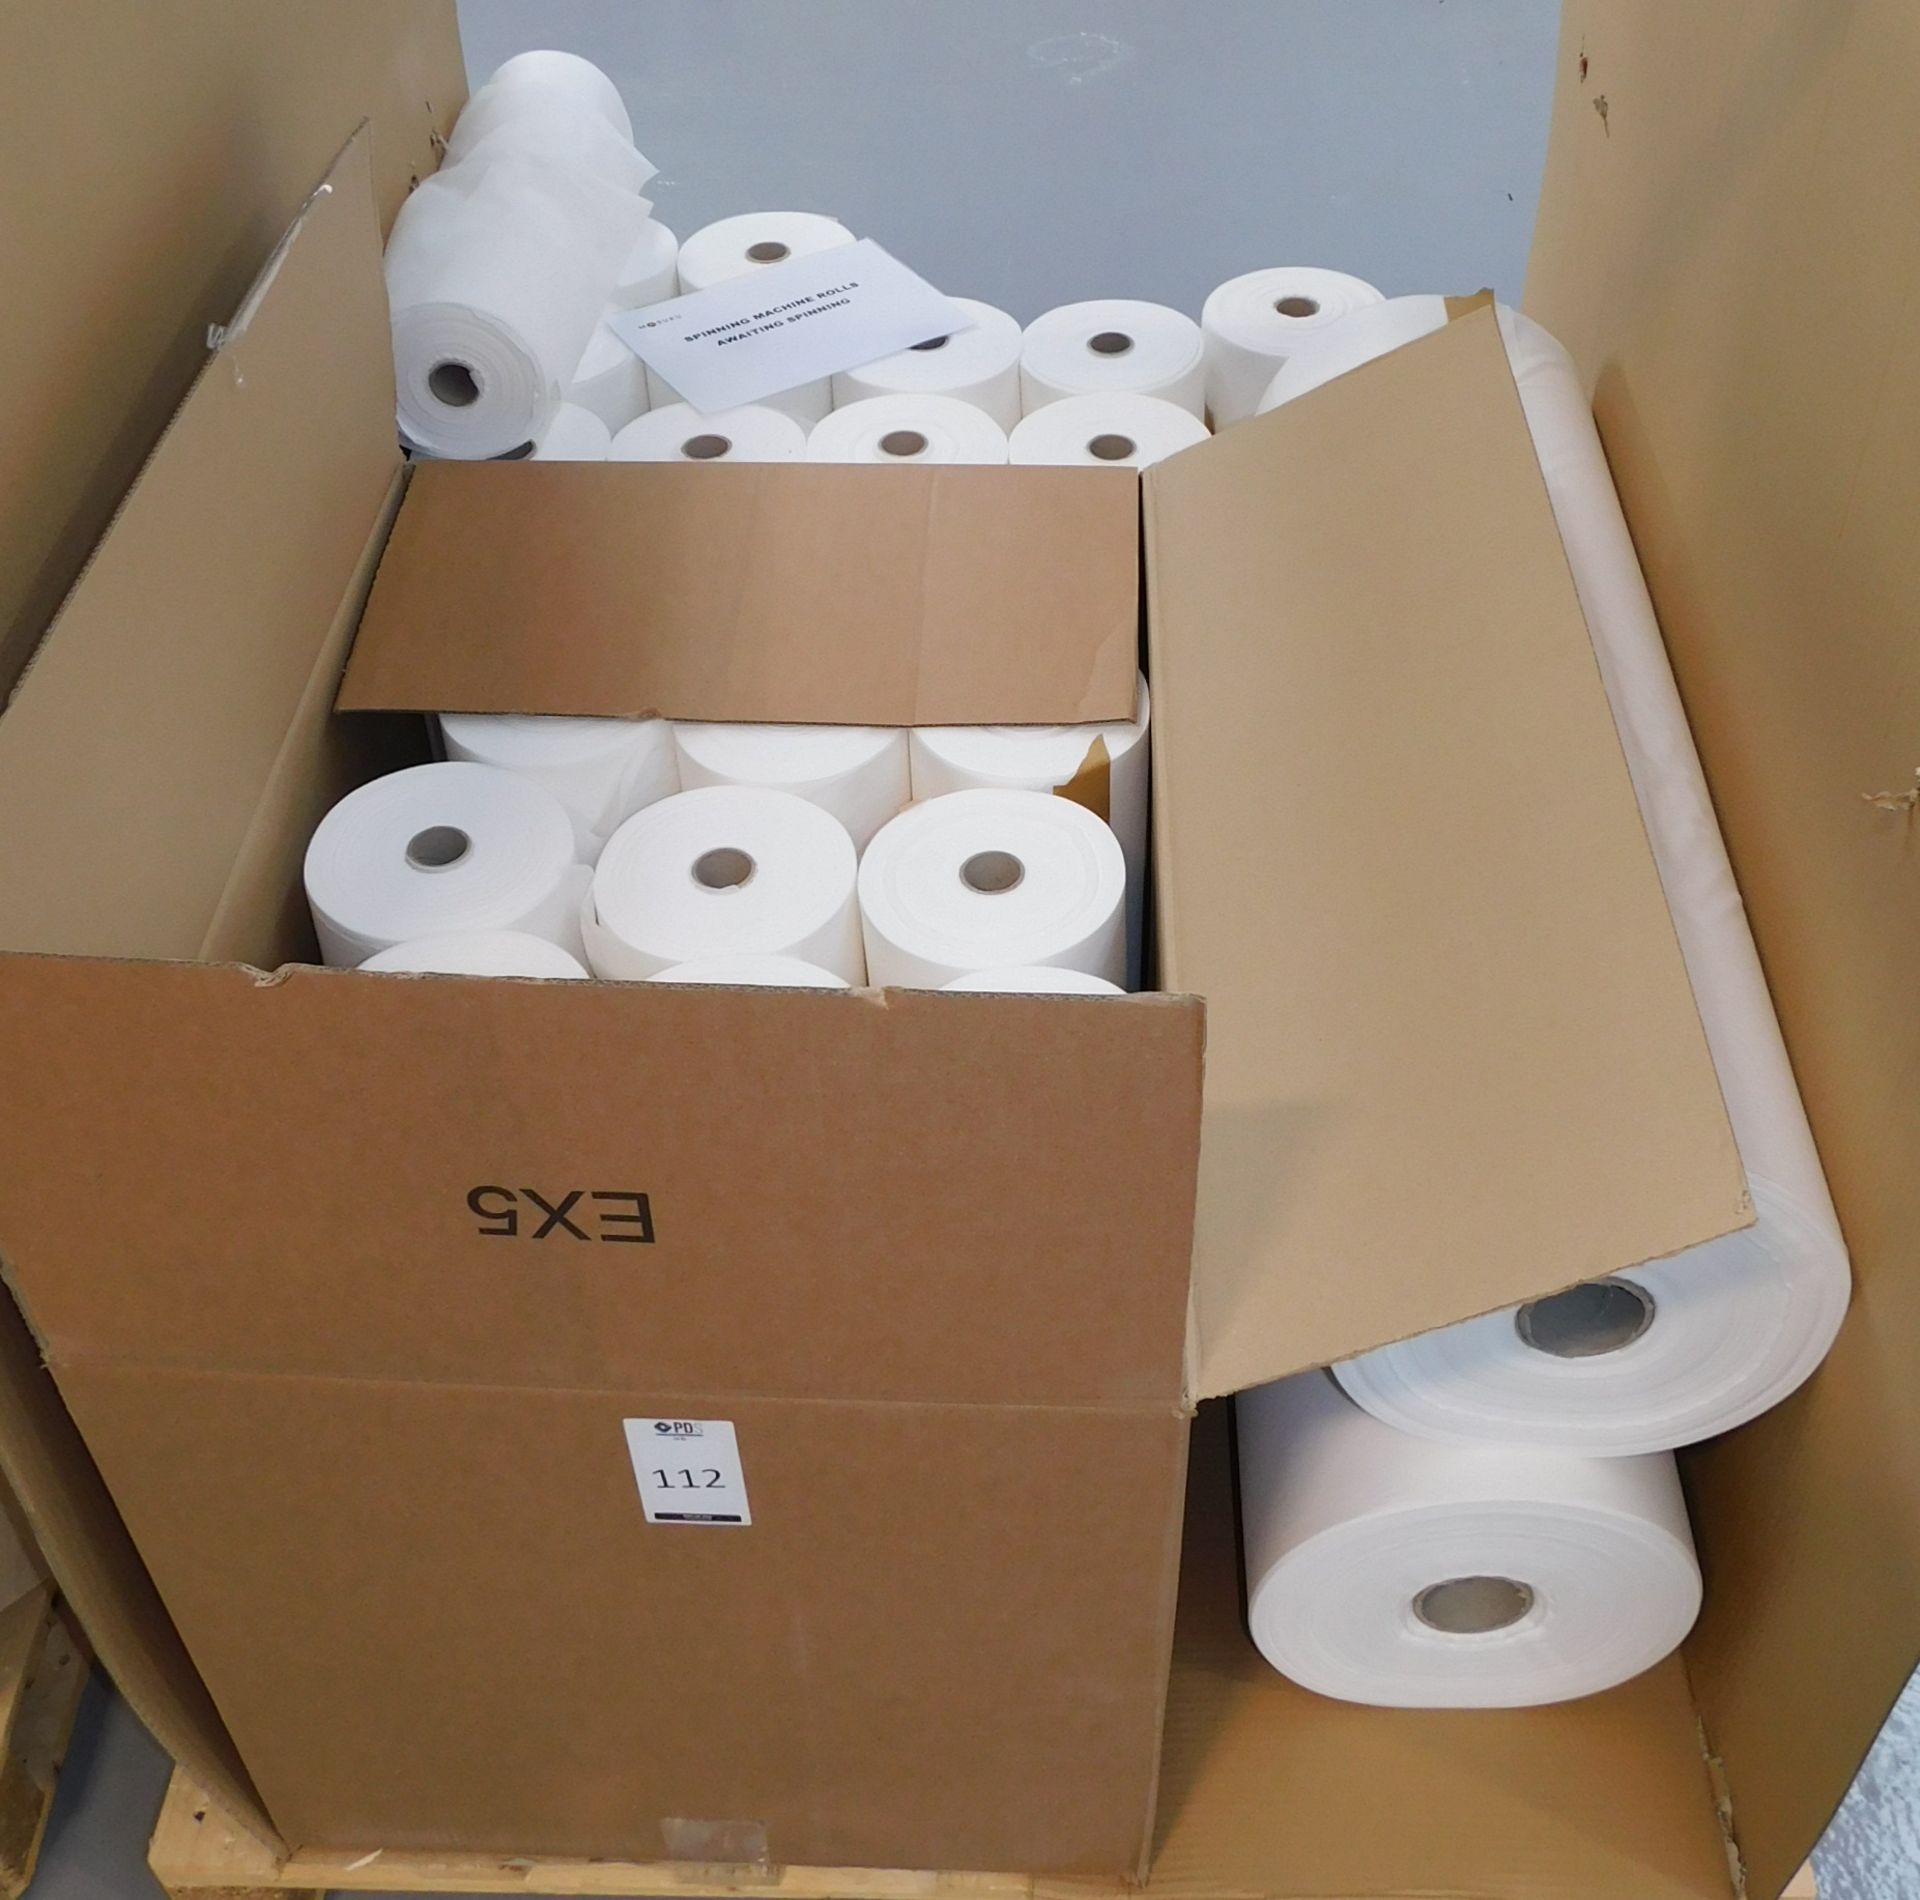 Contents of Stillage to include Viscose Fabric (Nylon Nanodot) Rolls, Cut to Fit Electrospinning